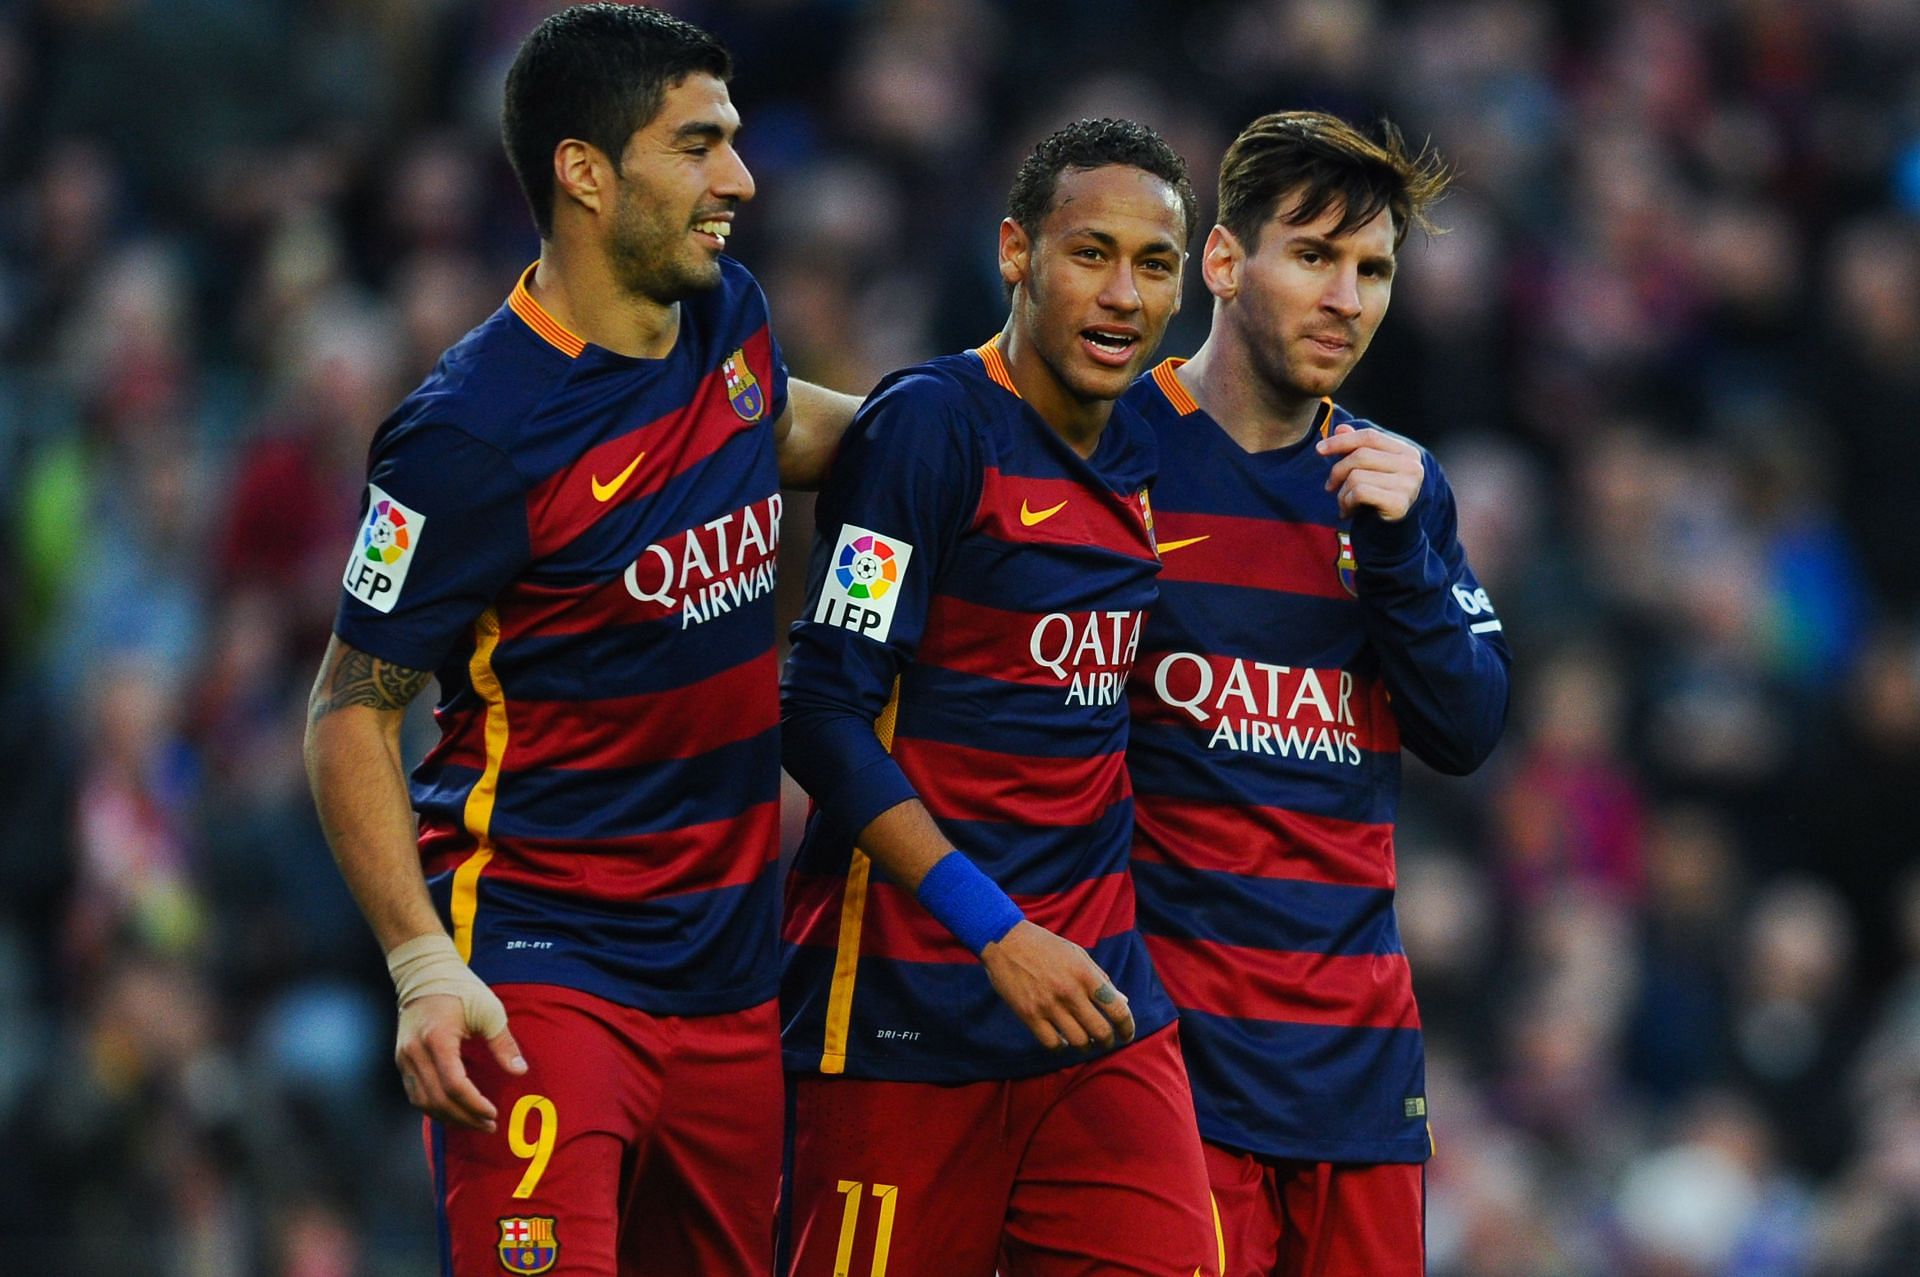 Neymar connected very well with Lionel Messi and Luis Suarez.